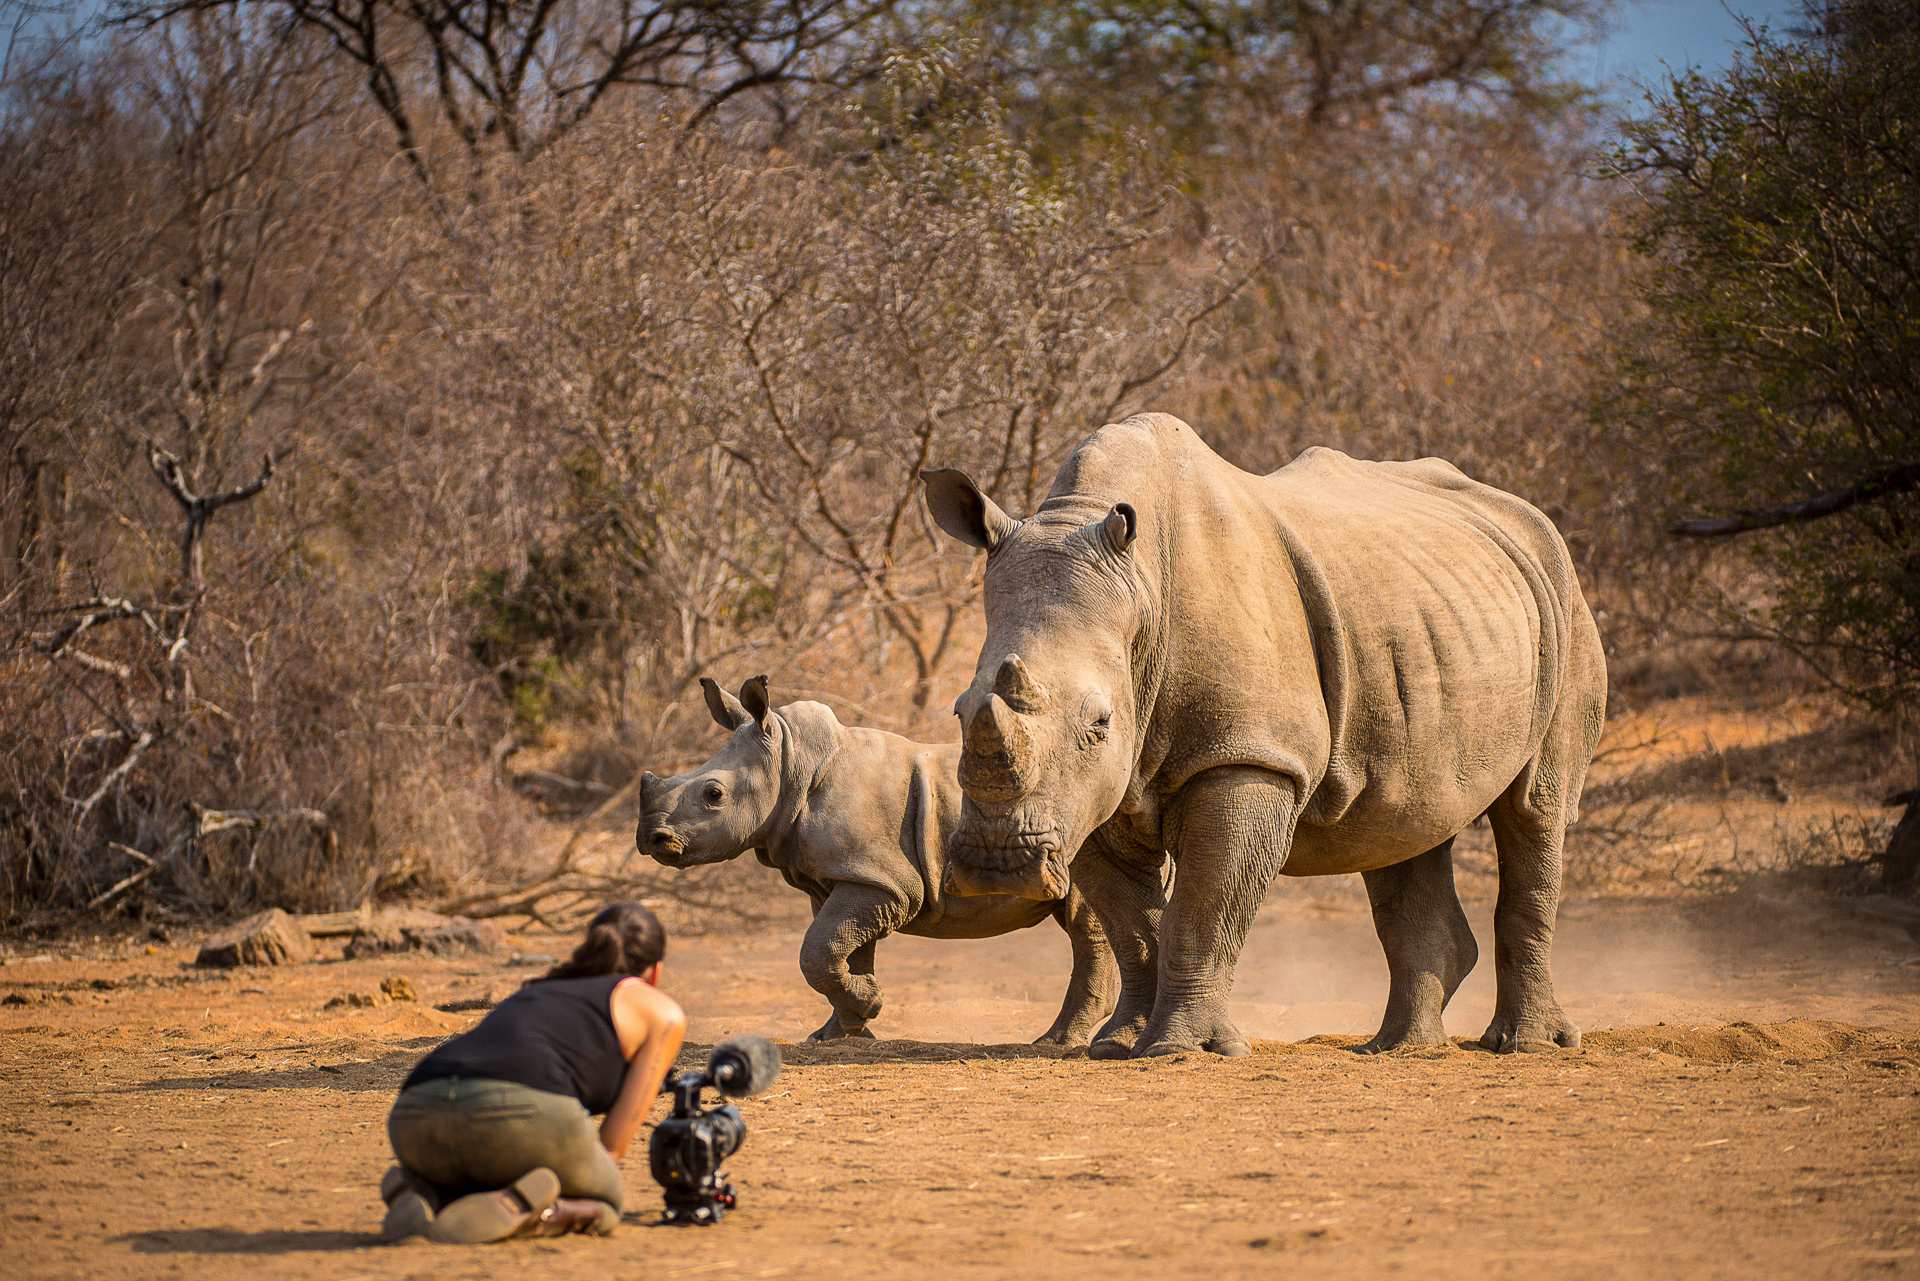 Image of Shannon Benson filming rhinos by Russell MacLaughlin